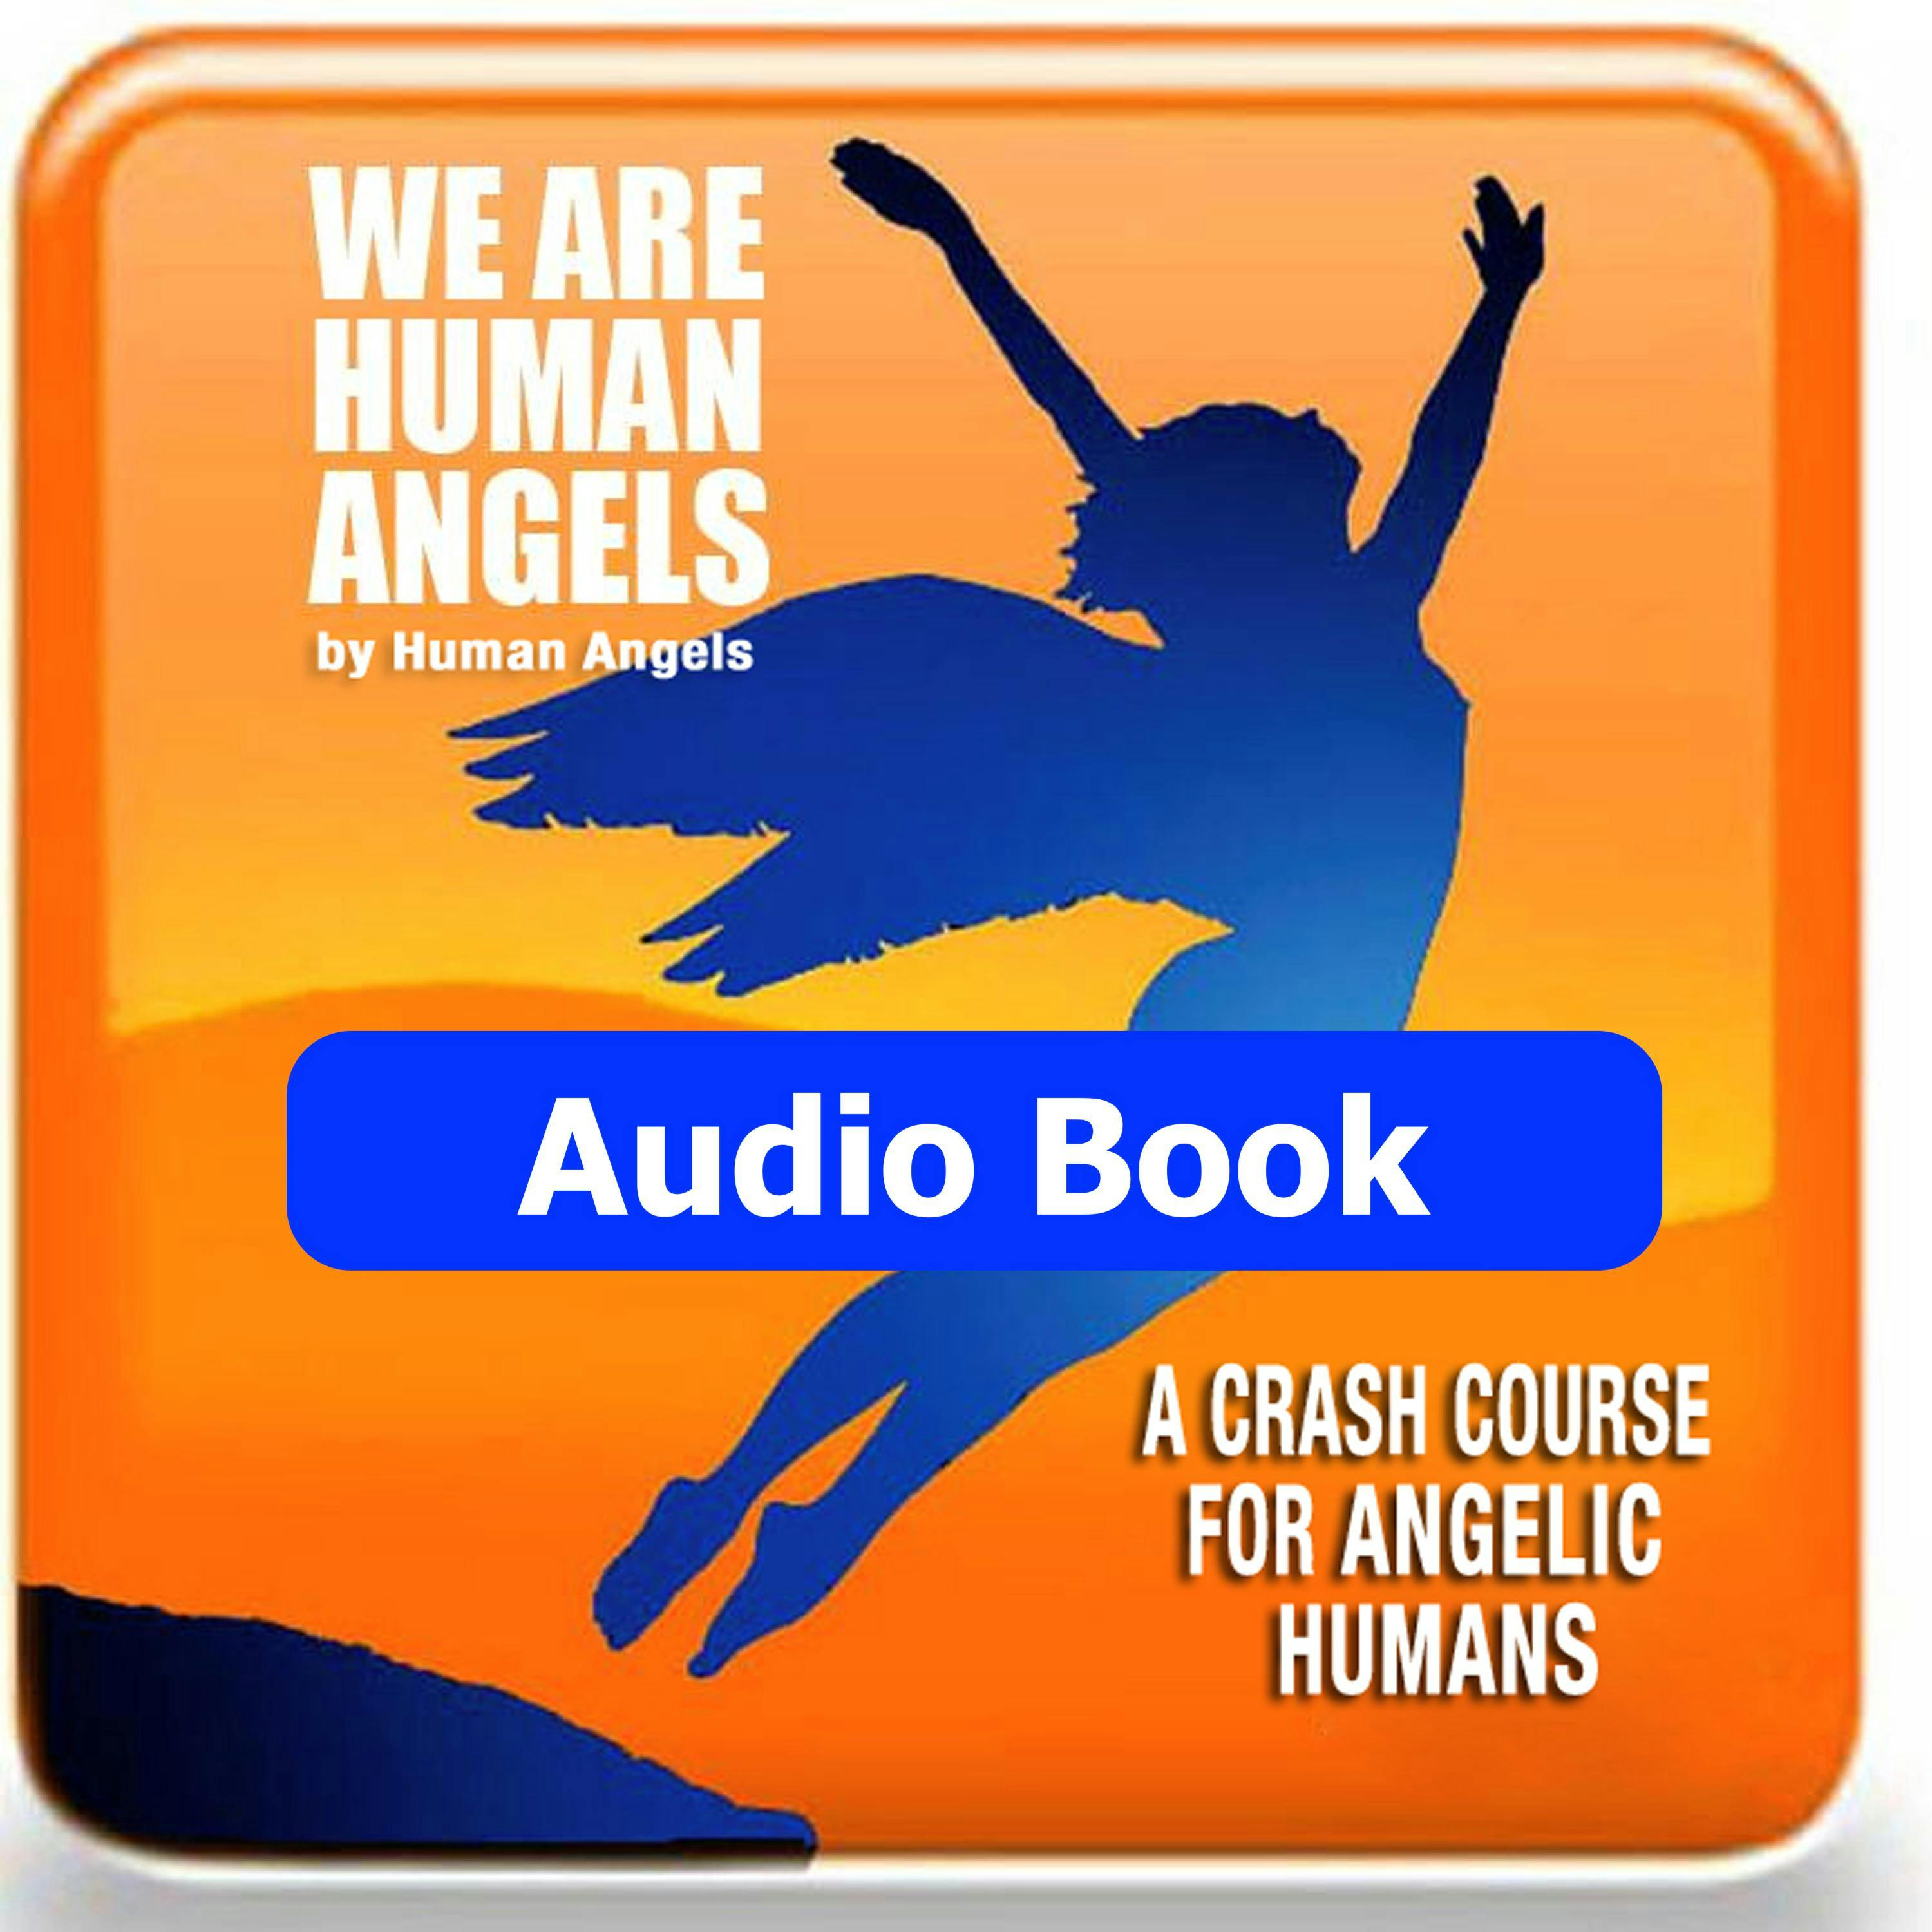 We Are Human Angels: A Crash Course For Angelic Humans - Human Angels